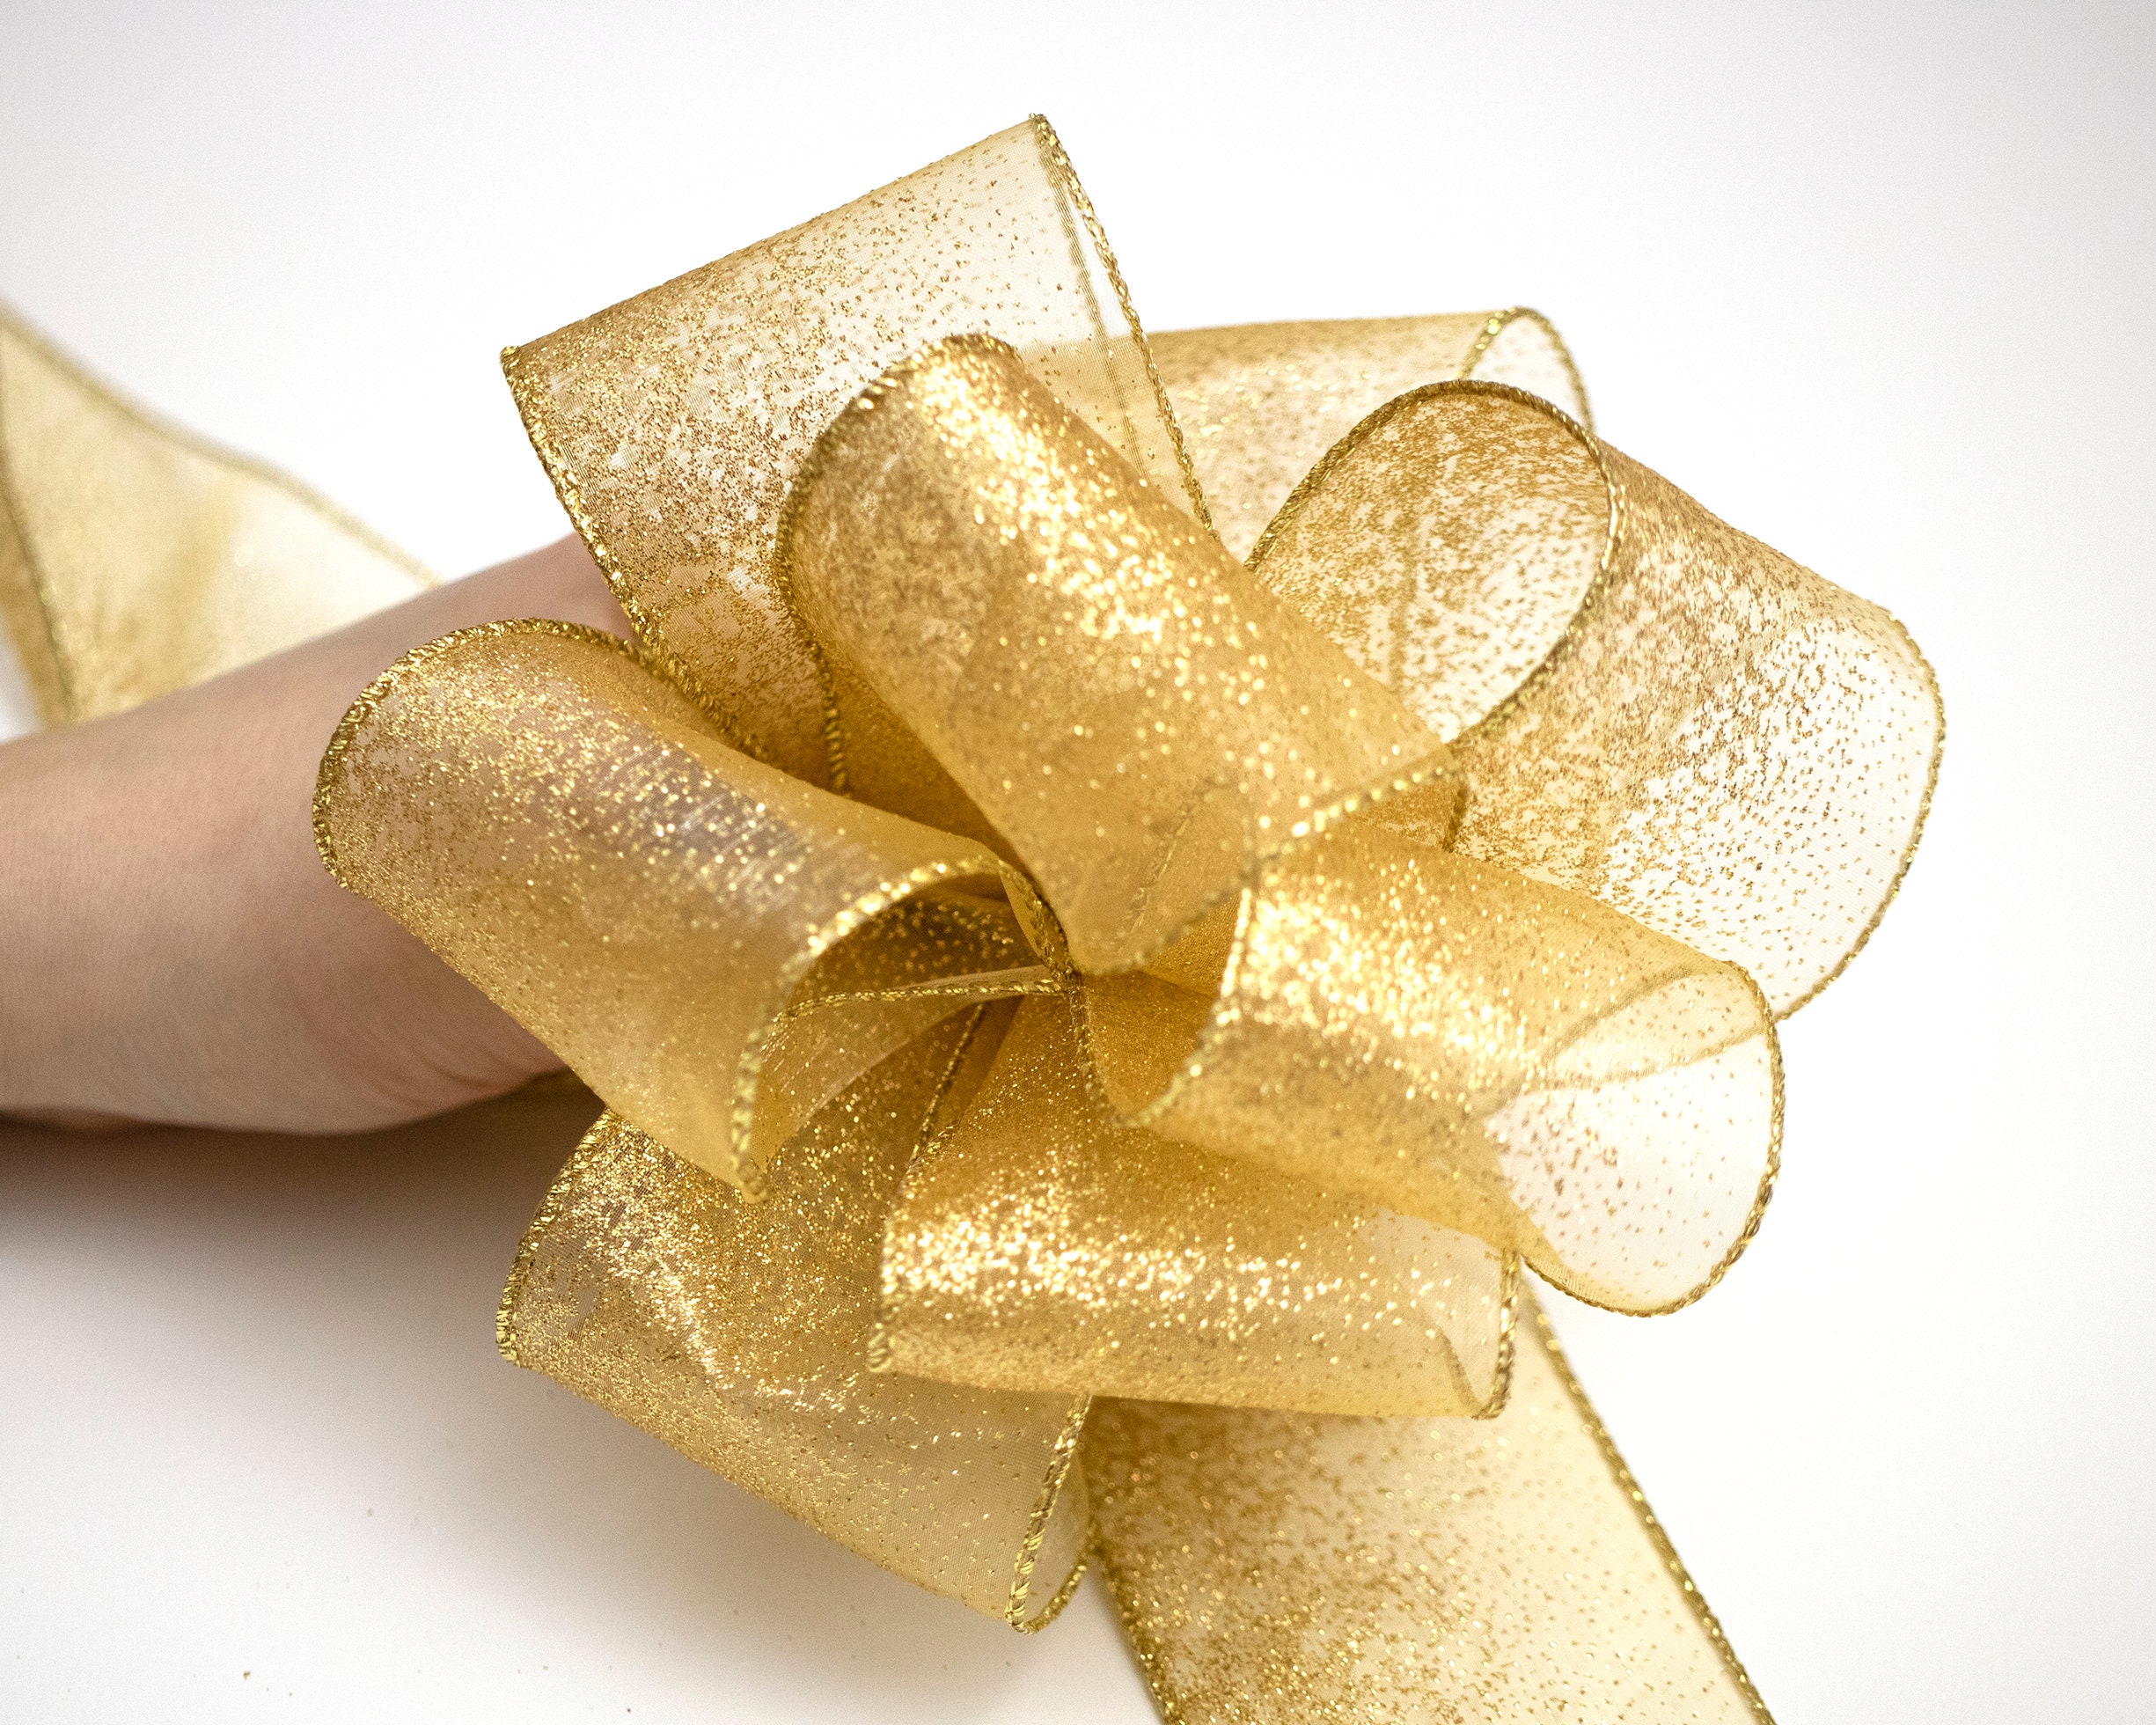 Organza Ribbon,9m Pink Sheer Organza Ribbon with Gold Glitter Metallic Gift Wrap,1 Inches Wide Bouquet Wrapping for Christmas New Year Party Wedding Decorations Gold 